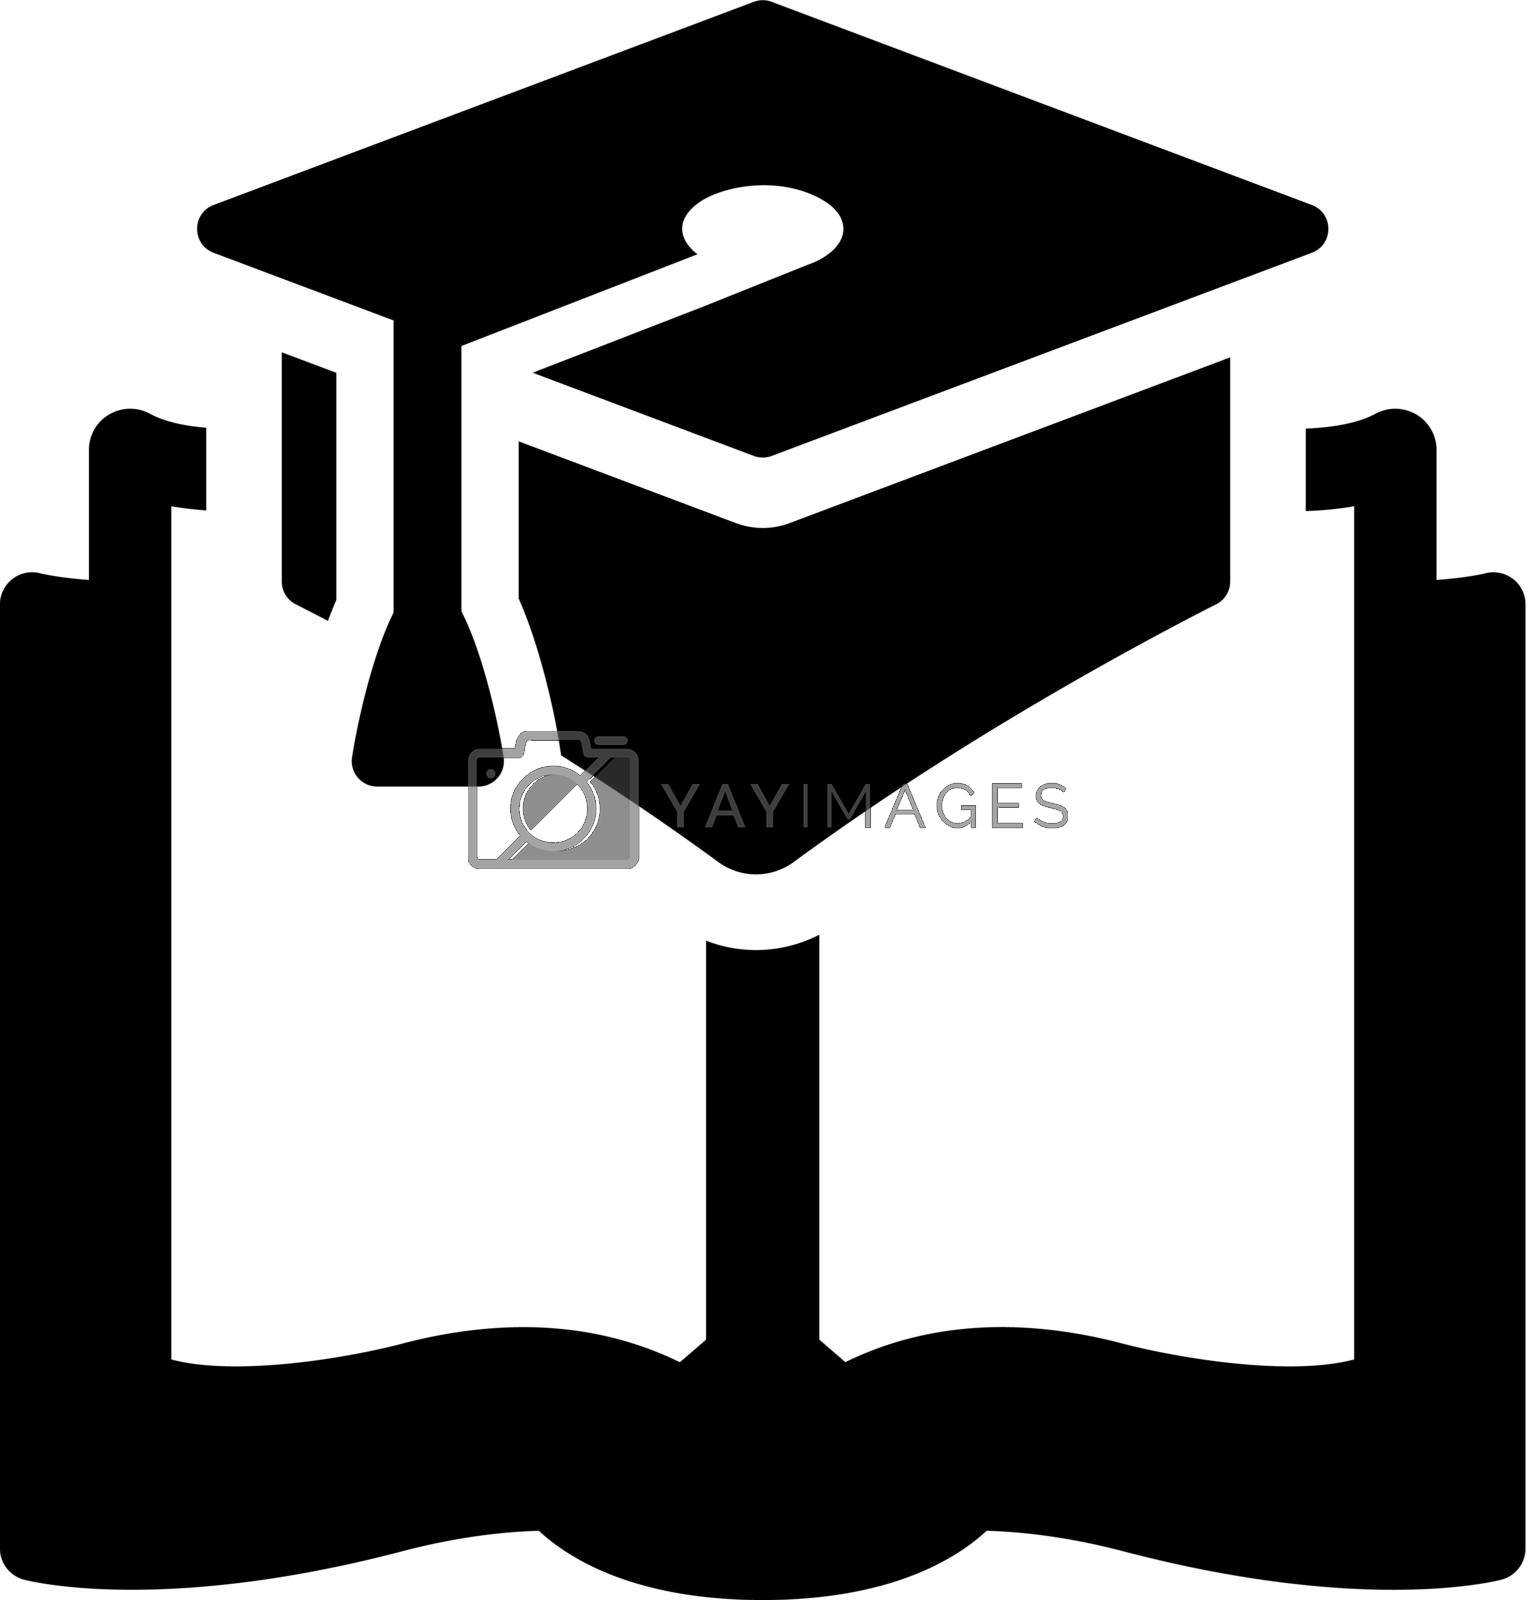 Higher education icon. Vector EPS file.